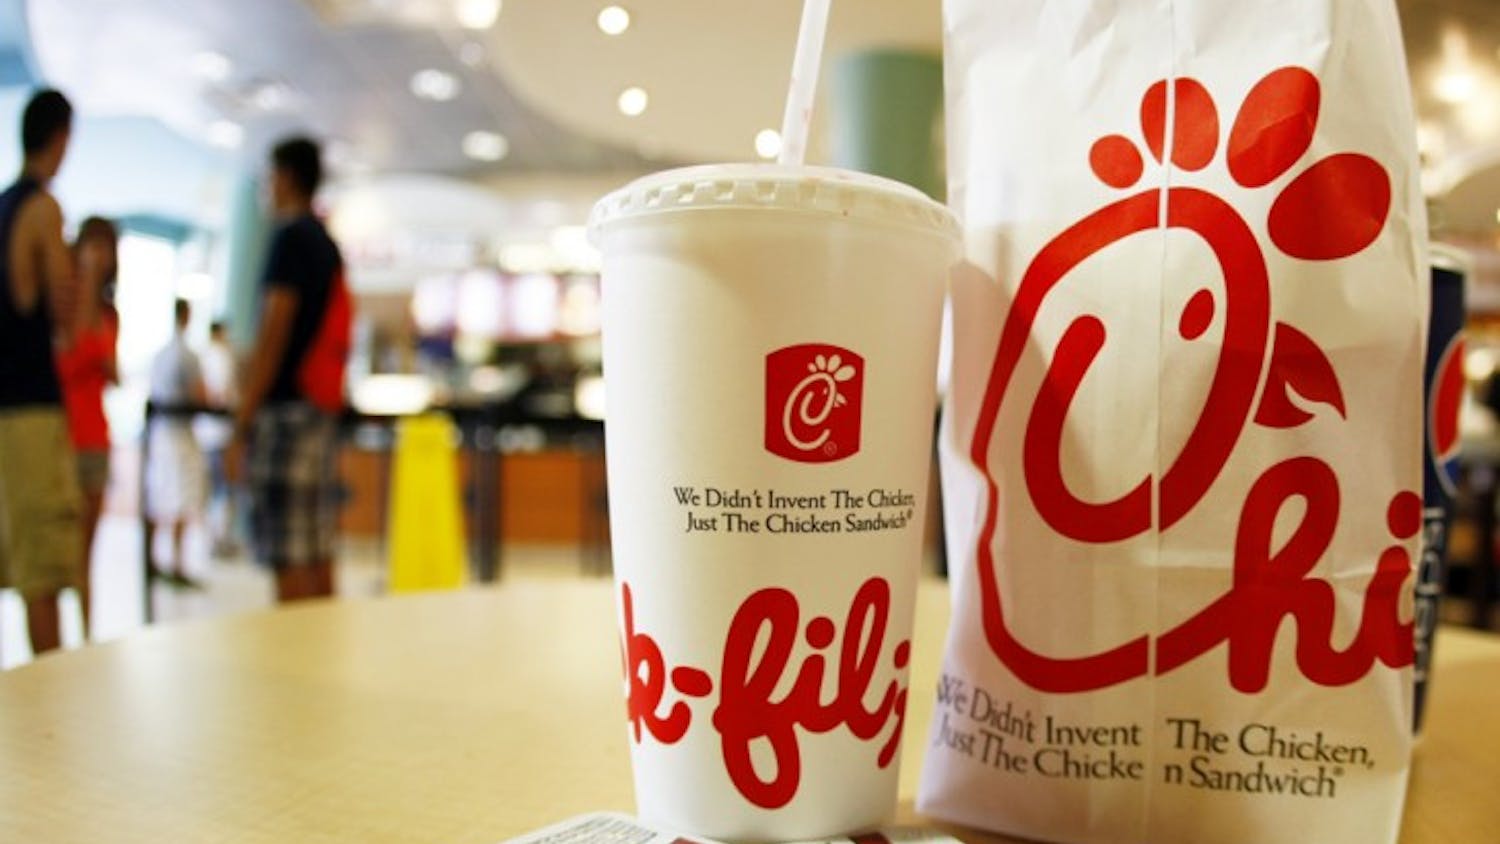 Chick-fil-A’s stance opposing same-sex marriage has caused recent controversy and led to Change.org petitions to remove the fast food chain from college campuses.